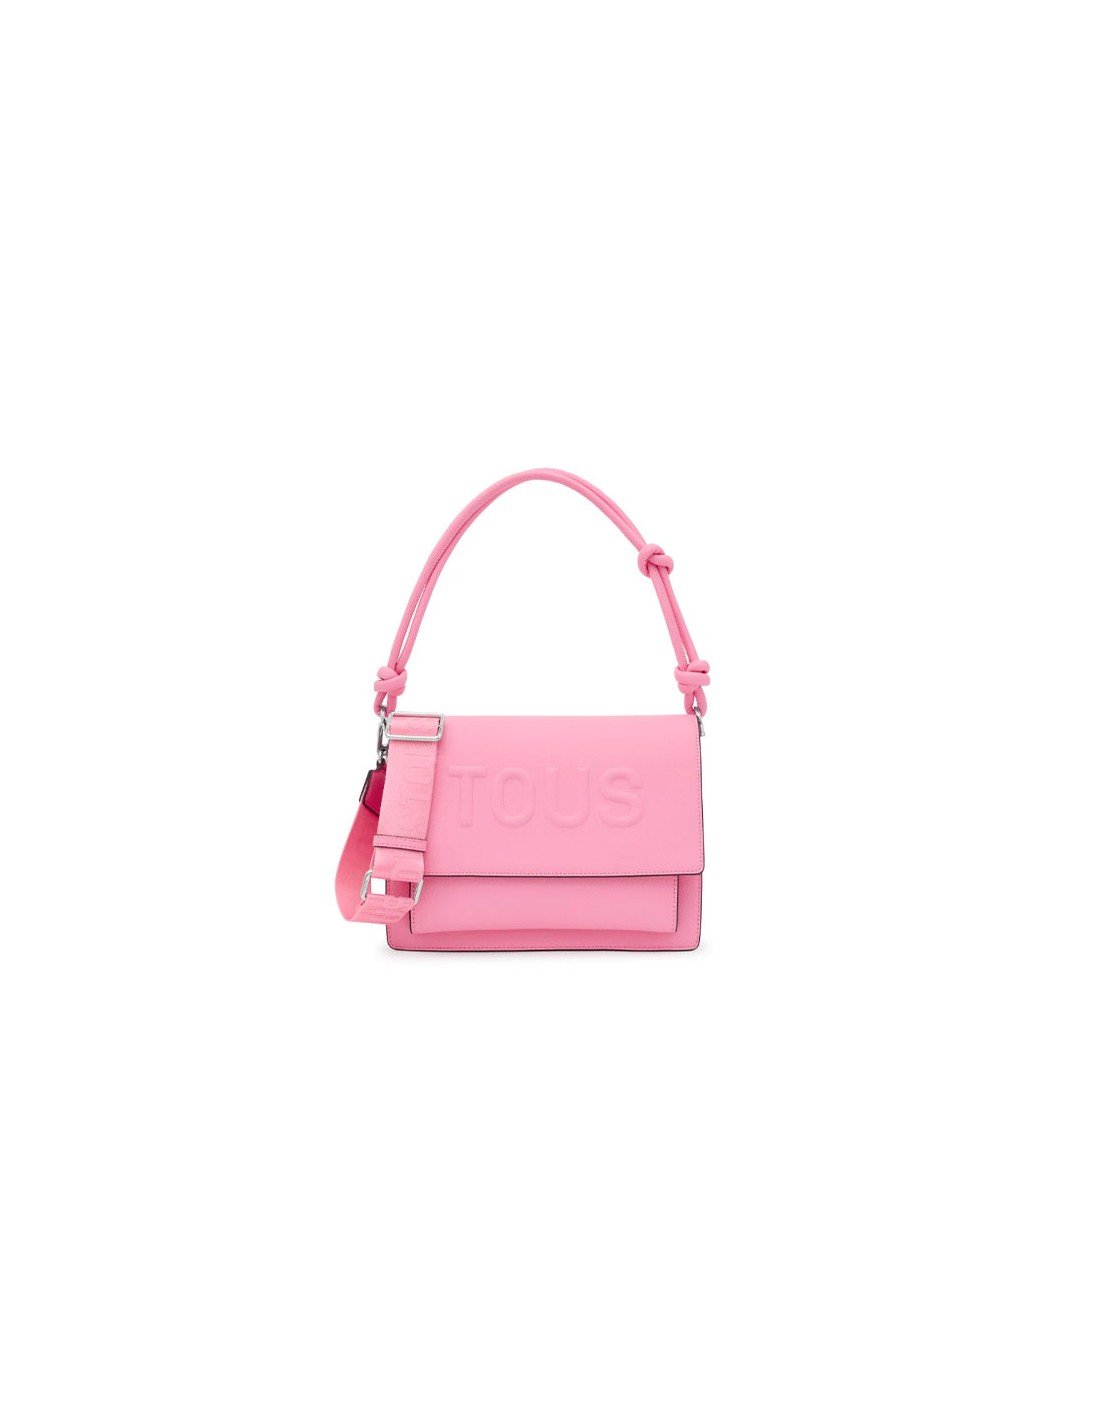 Tous Audree medium shoulder bag in pink from the La Rue New collection